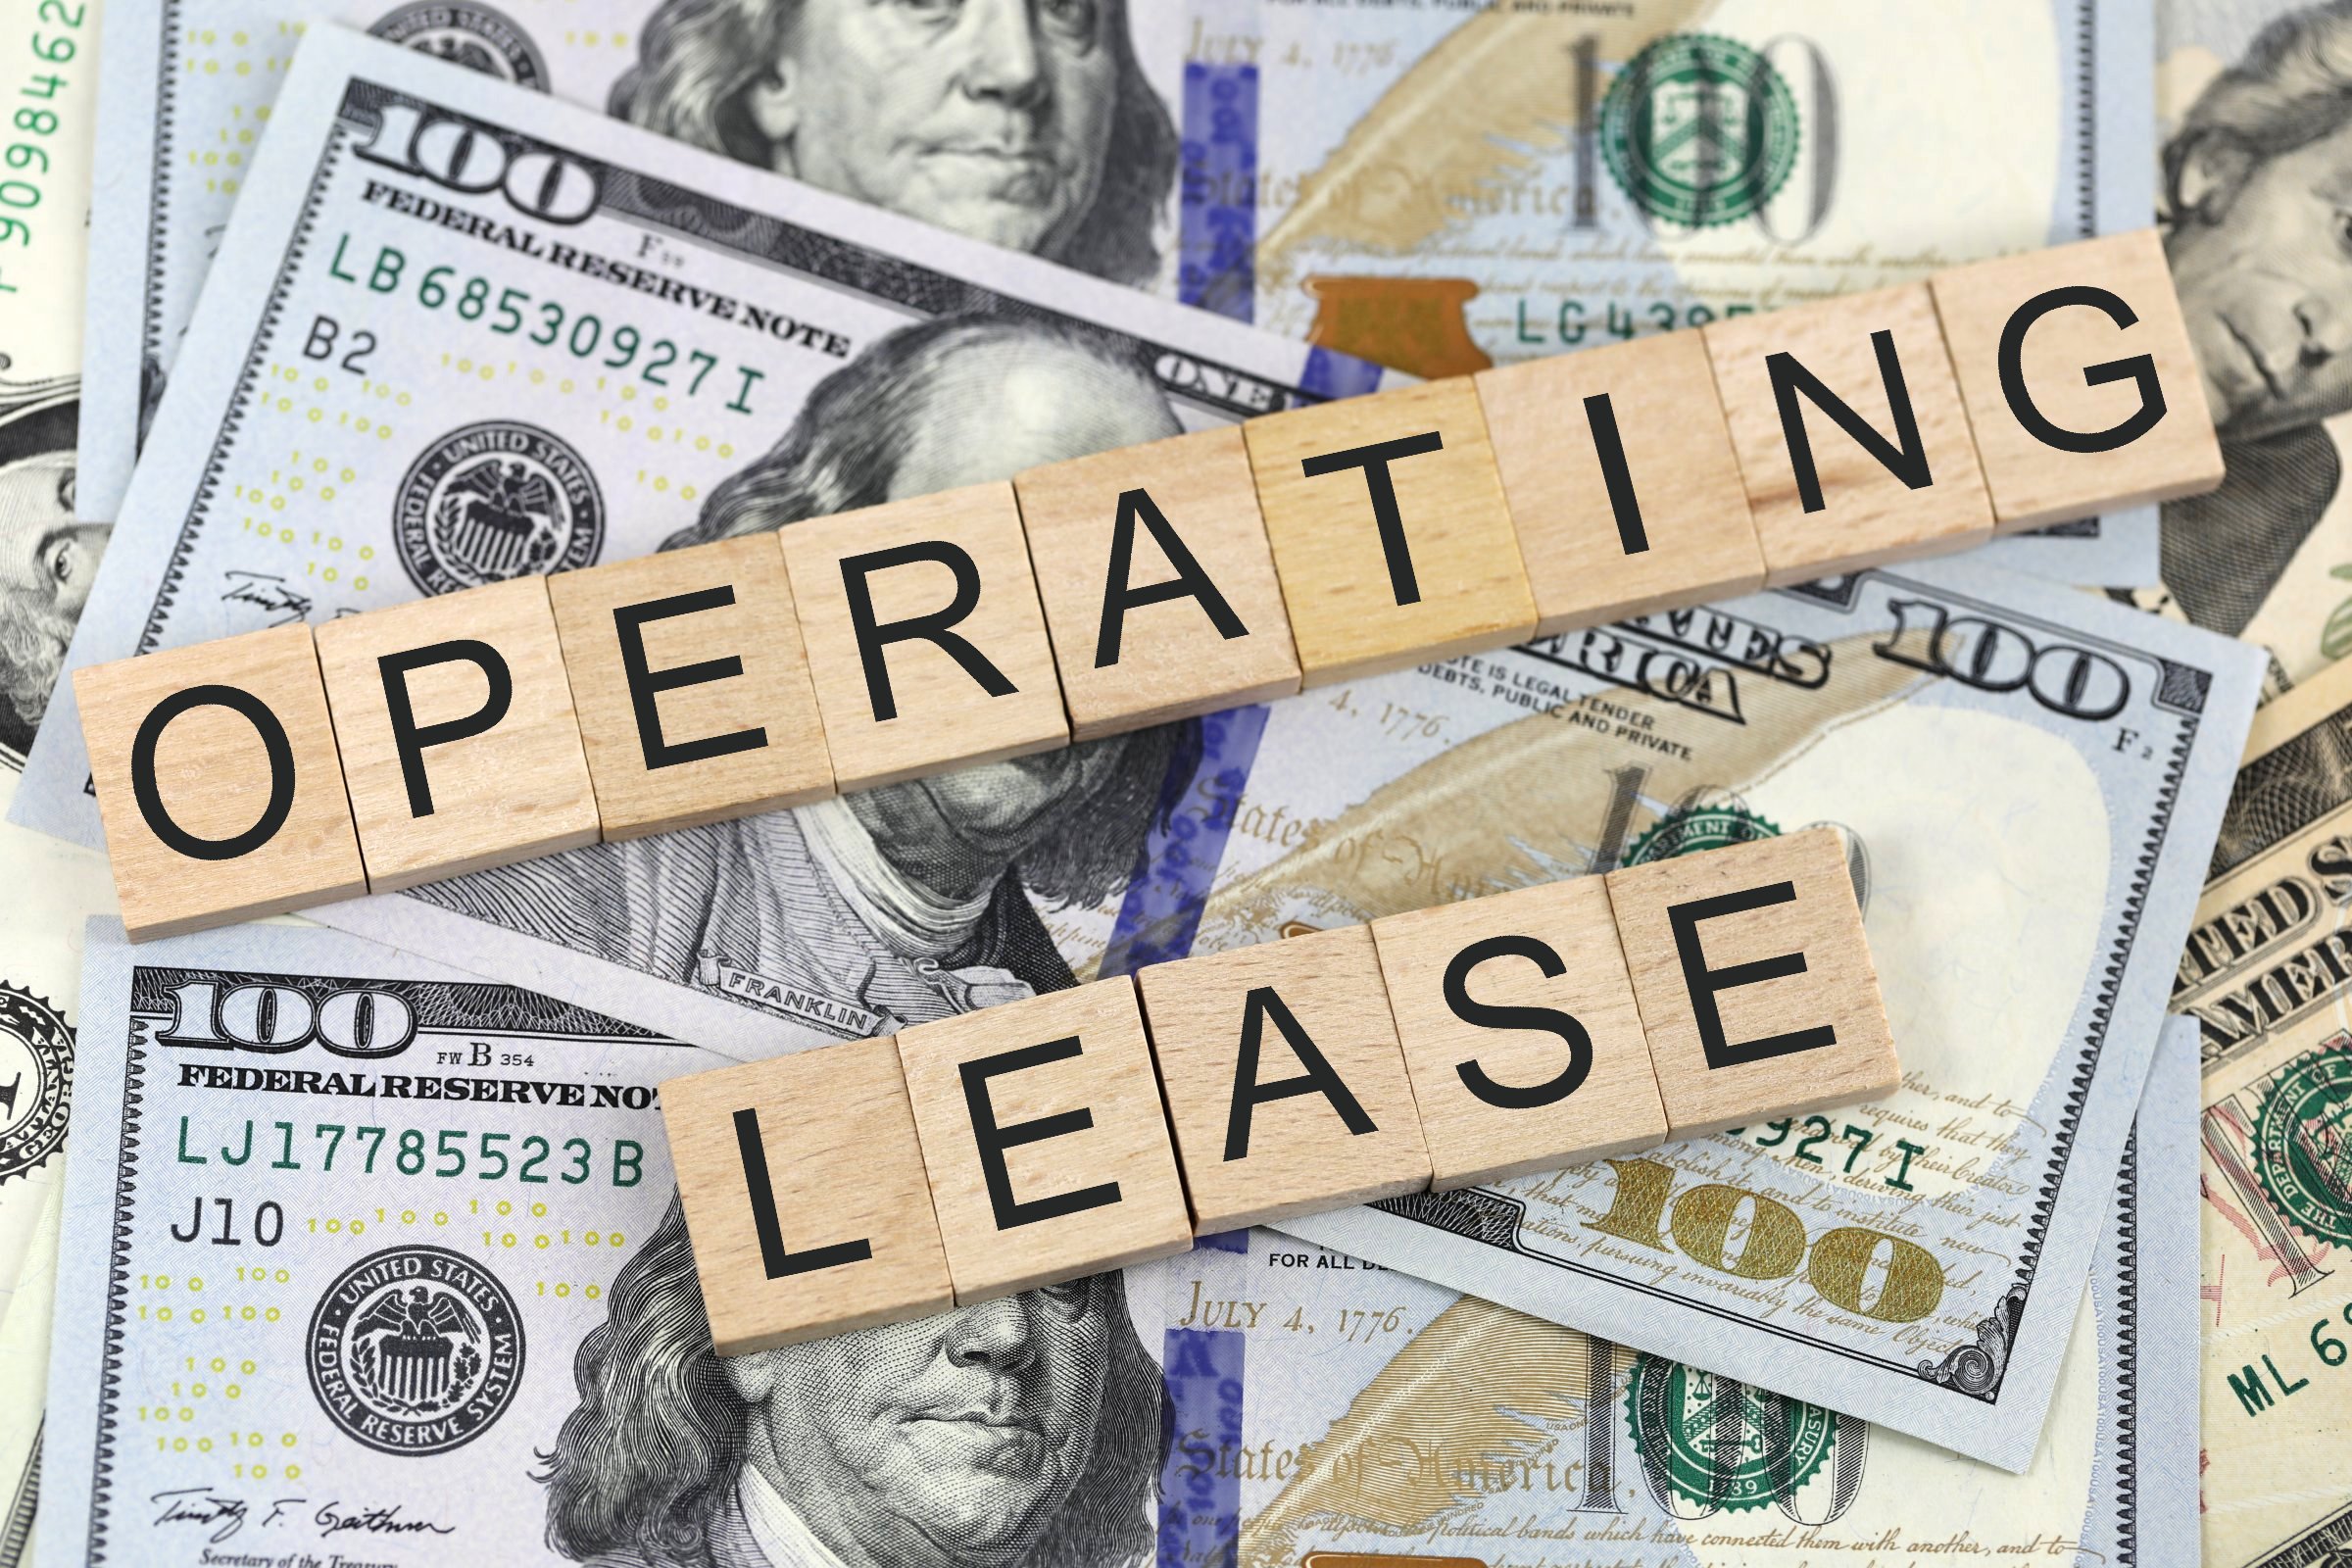 operating lease